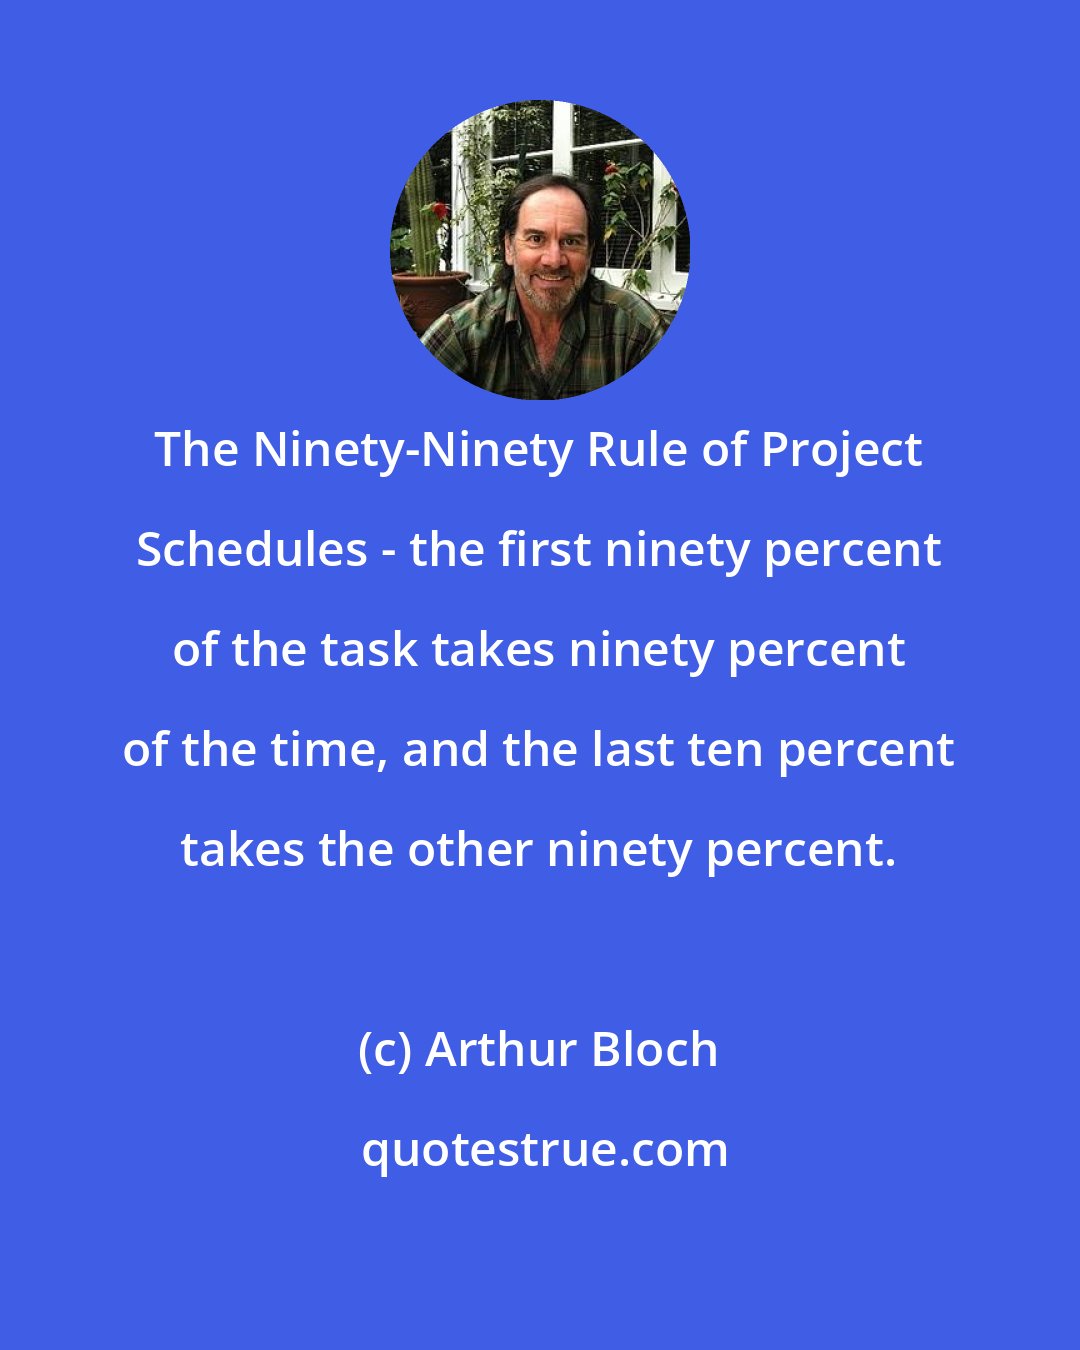 Arthur Bloch: The Ninety-Ninety Rule of Project Schedules - the first ninety percent of the task takes ninety percent of the time, and the last ten percent takes the other ninety percent.